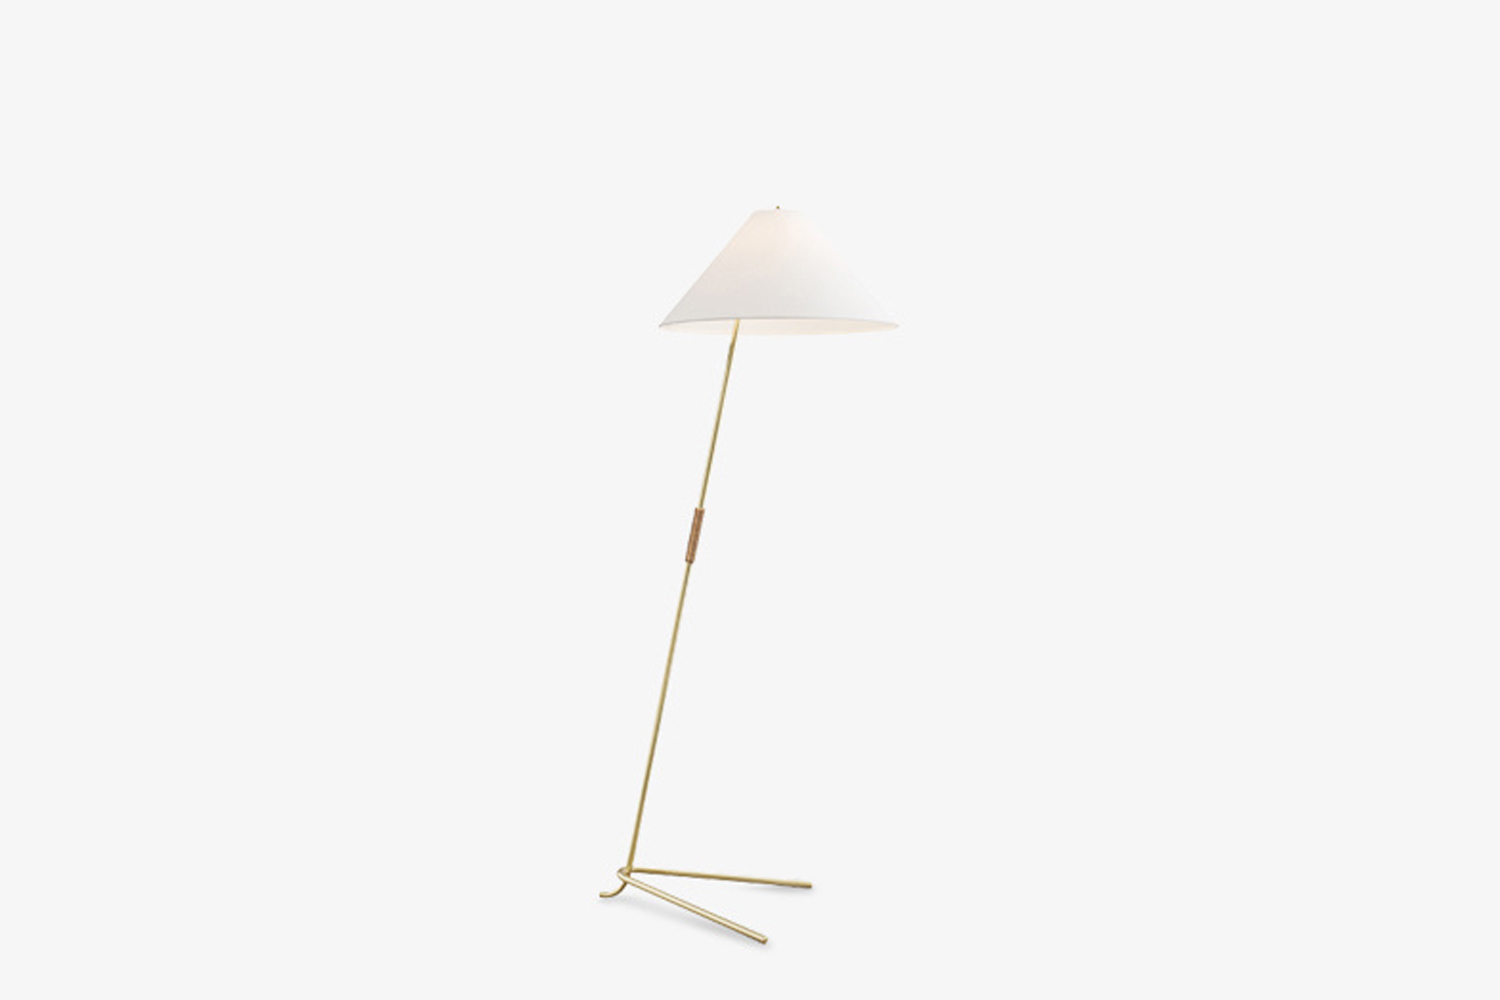 the floor lamp is the hase bl brass and leather floor lamp; \$3,995 cad (\$3,07 12